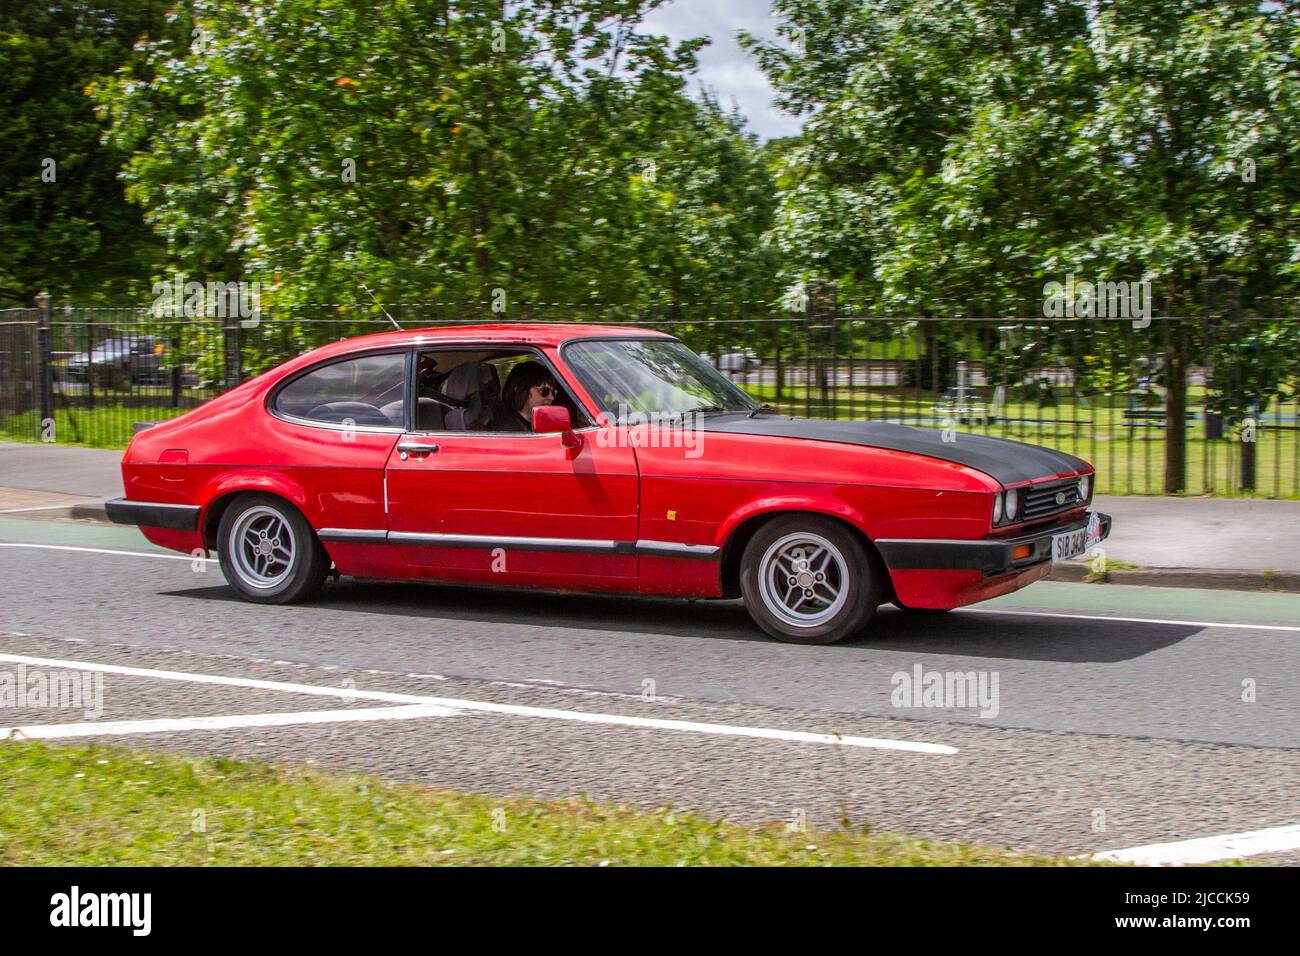 1986 80s eighties red FORD Capri 1993 cc petrol 2dr coupe automobiles featured during the 58th year of the Manchester to Blackpool Touring Assembly for Veteran, Vintage, Classic and Cherished cars. Stock Photo